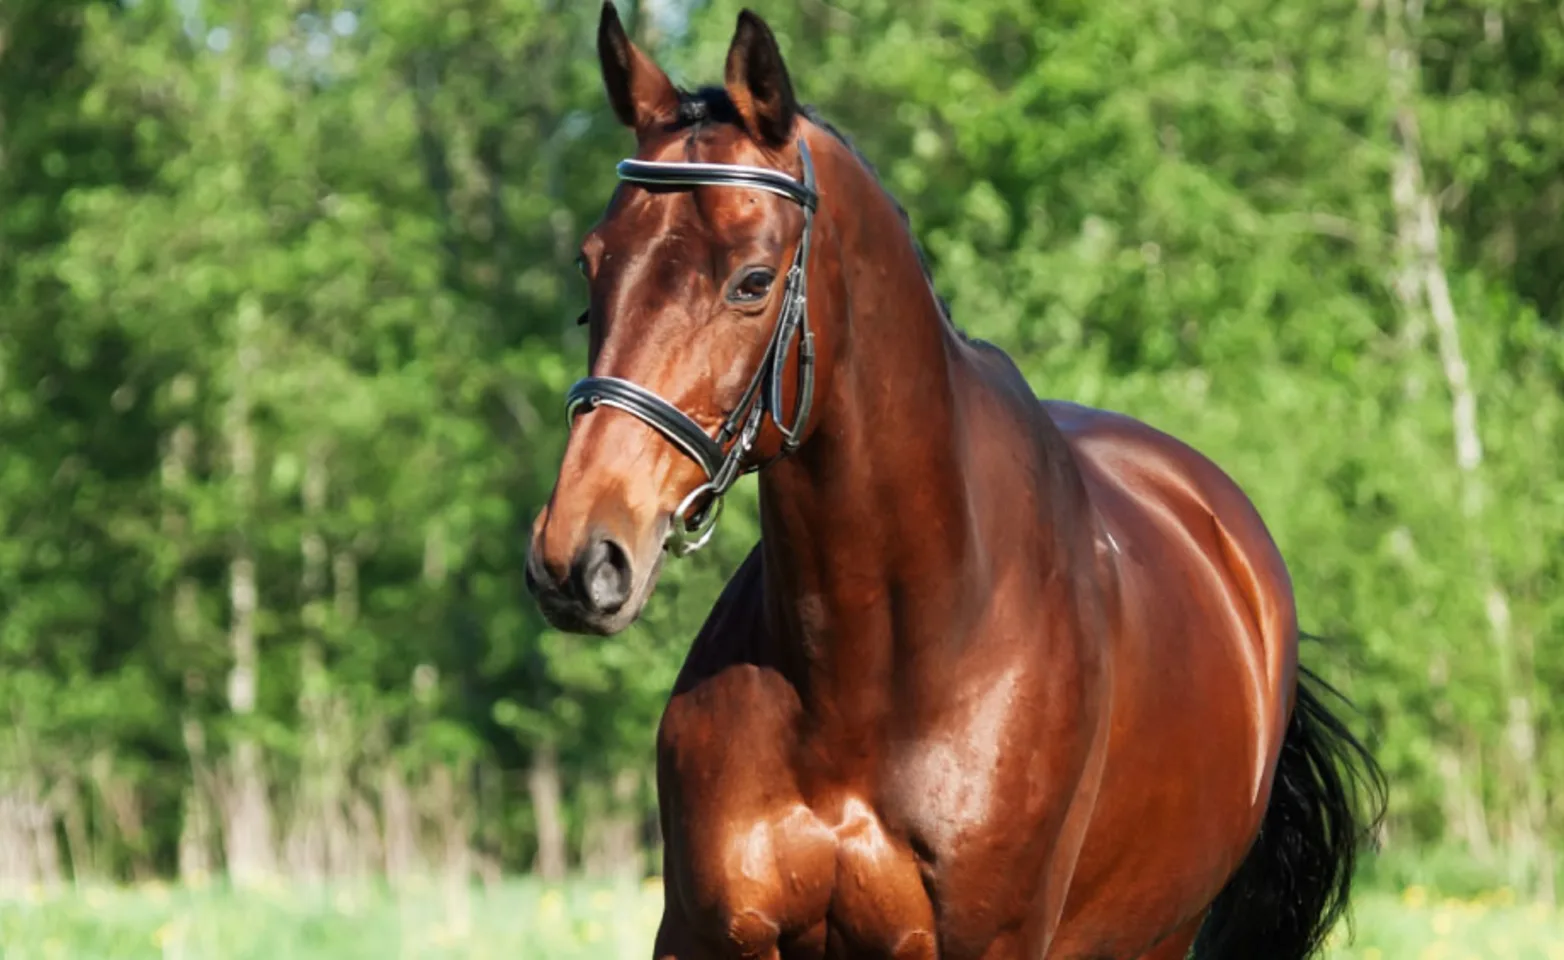 Upper half of brown horse against a green background